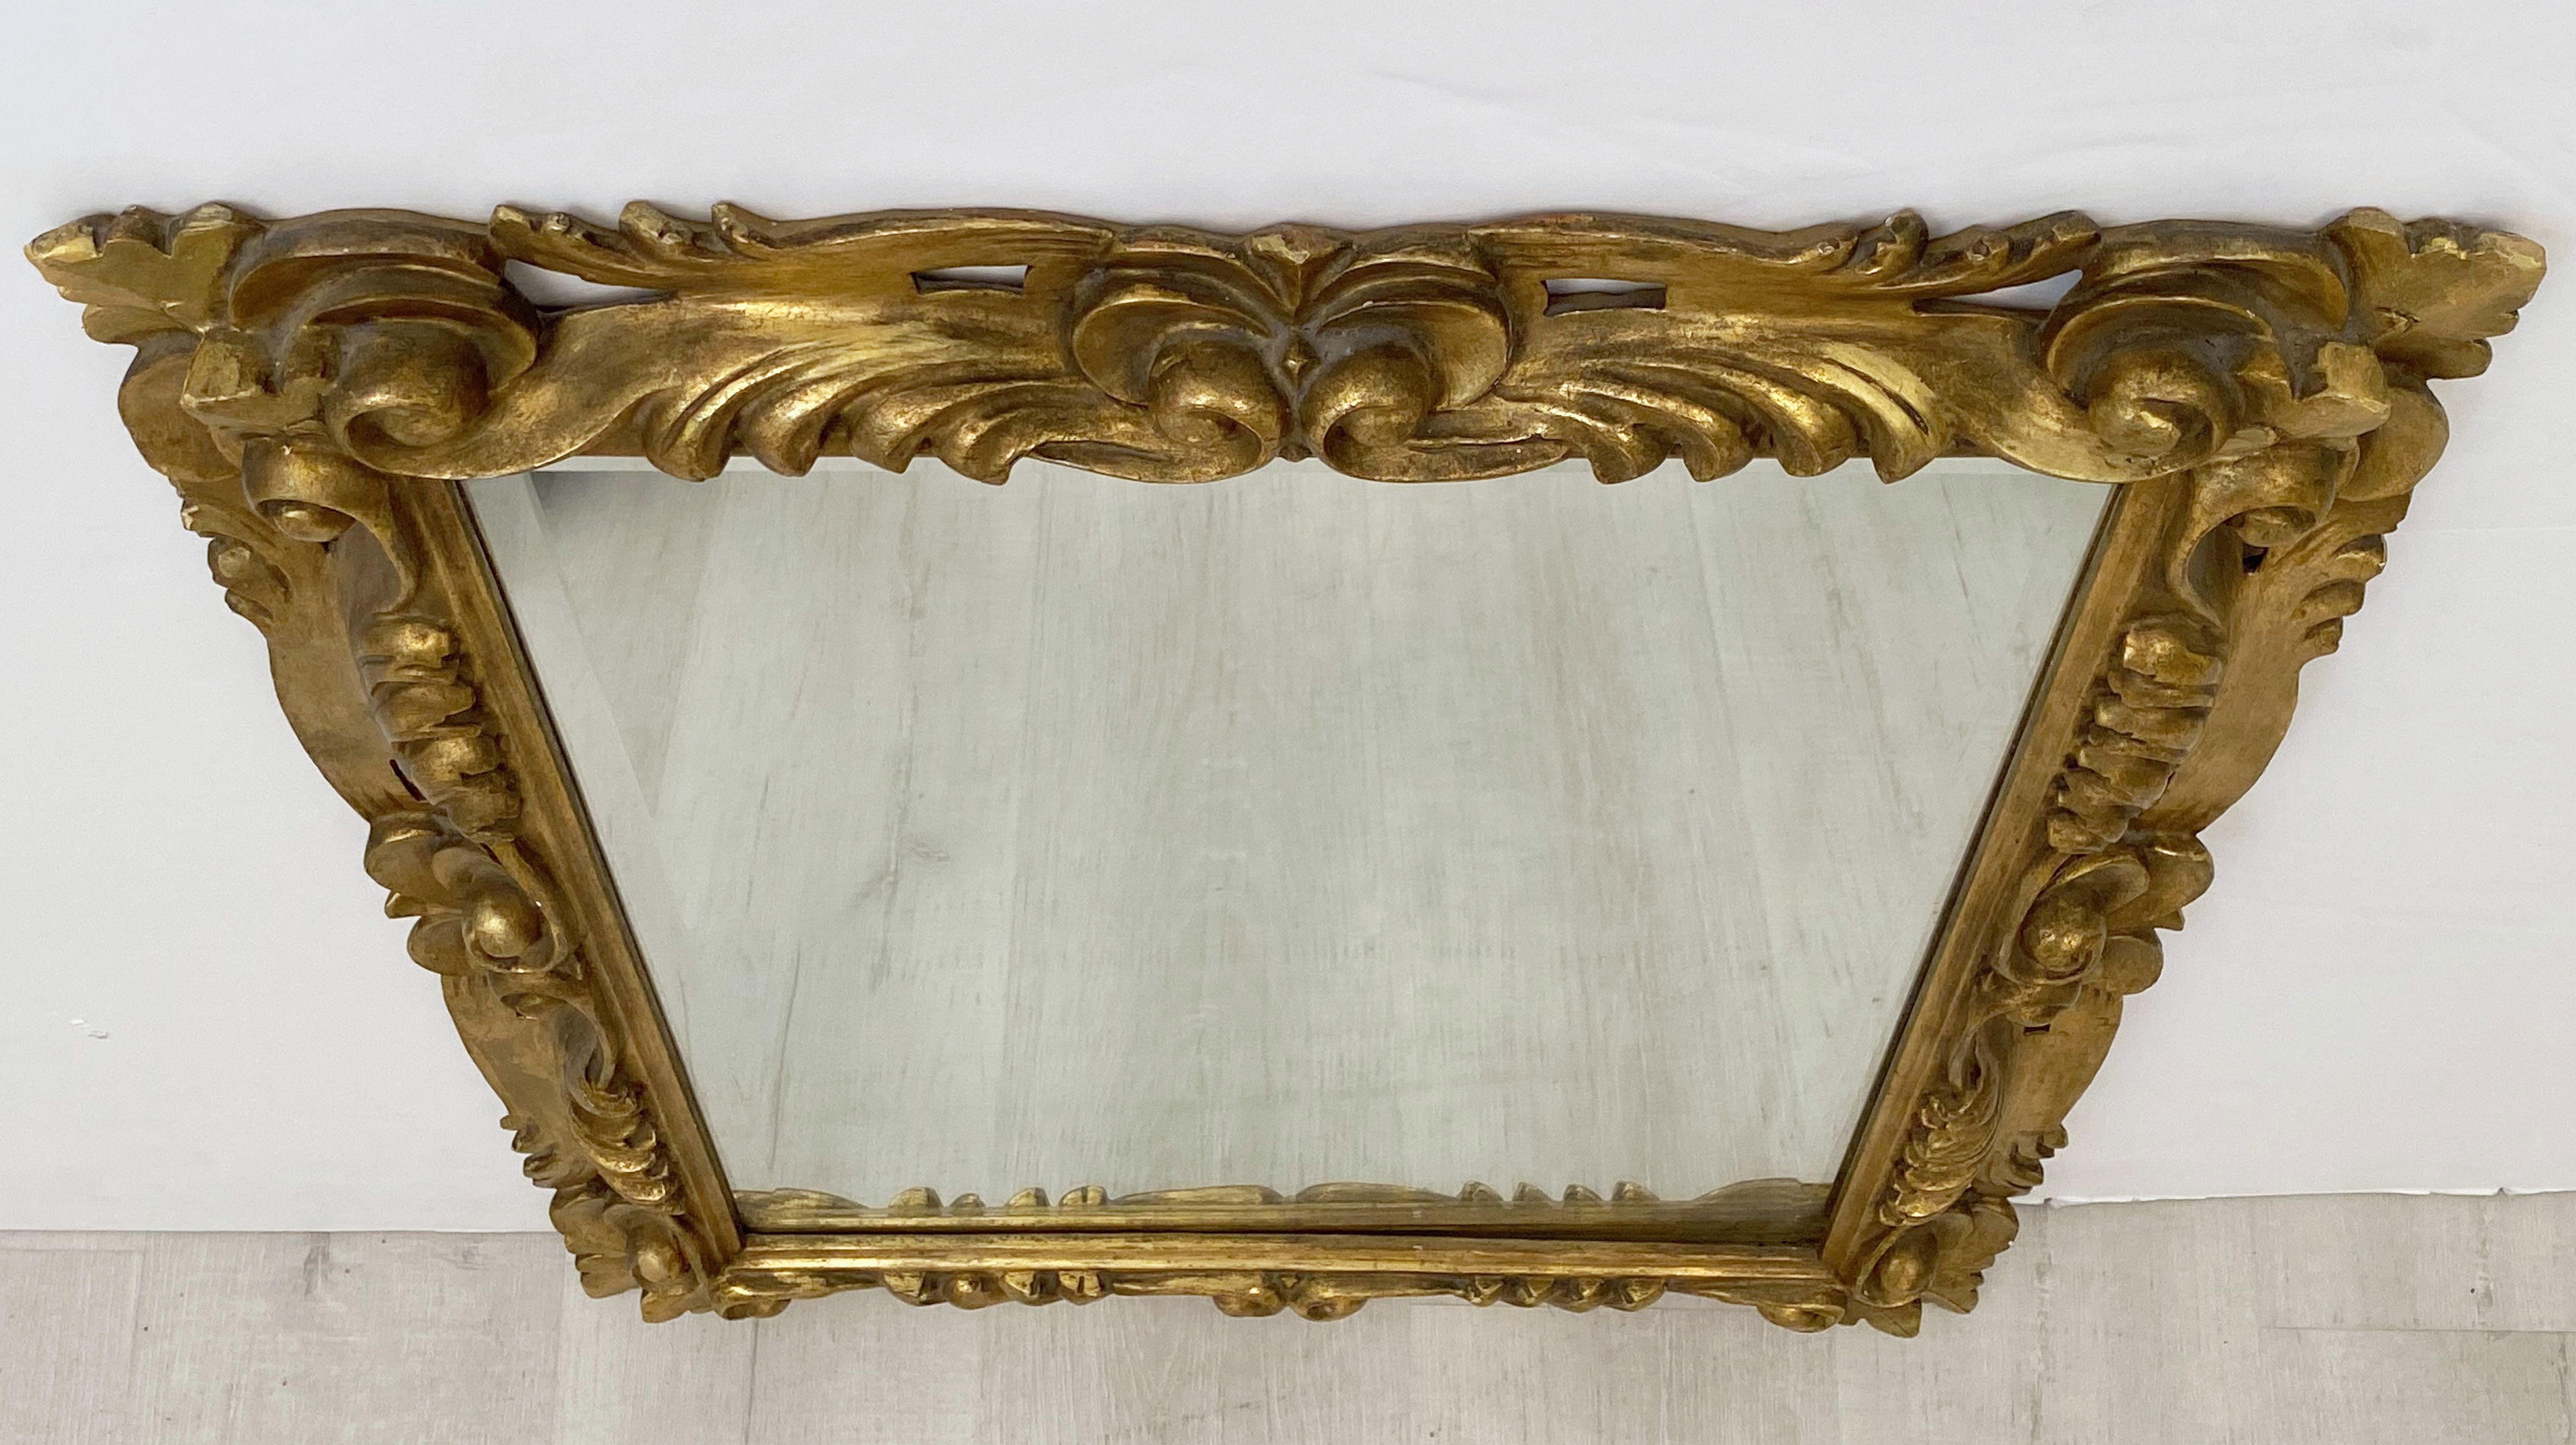 20th Century Italian Rococo Rectangular Beveled Mirror with Carved Gilt Frame (H 29 x W 23) For Sale